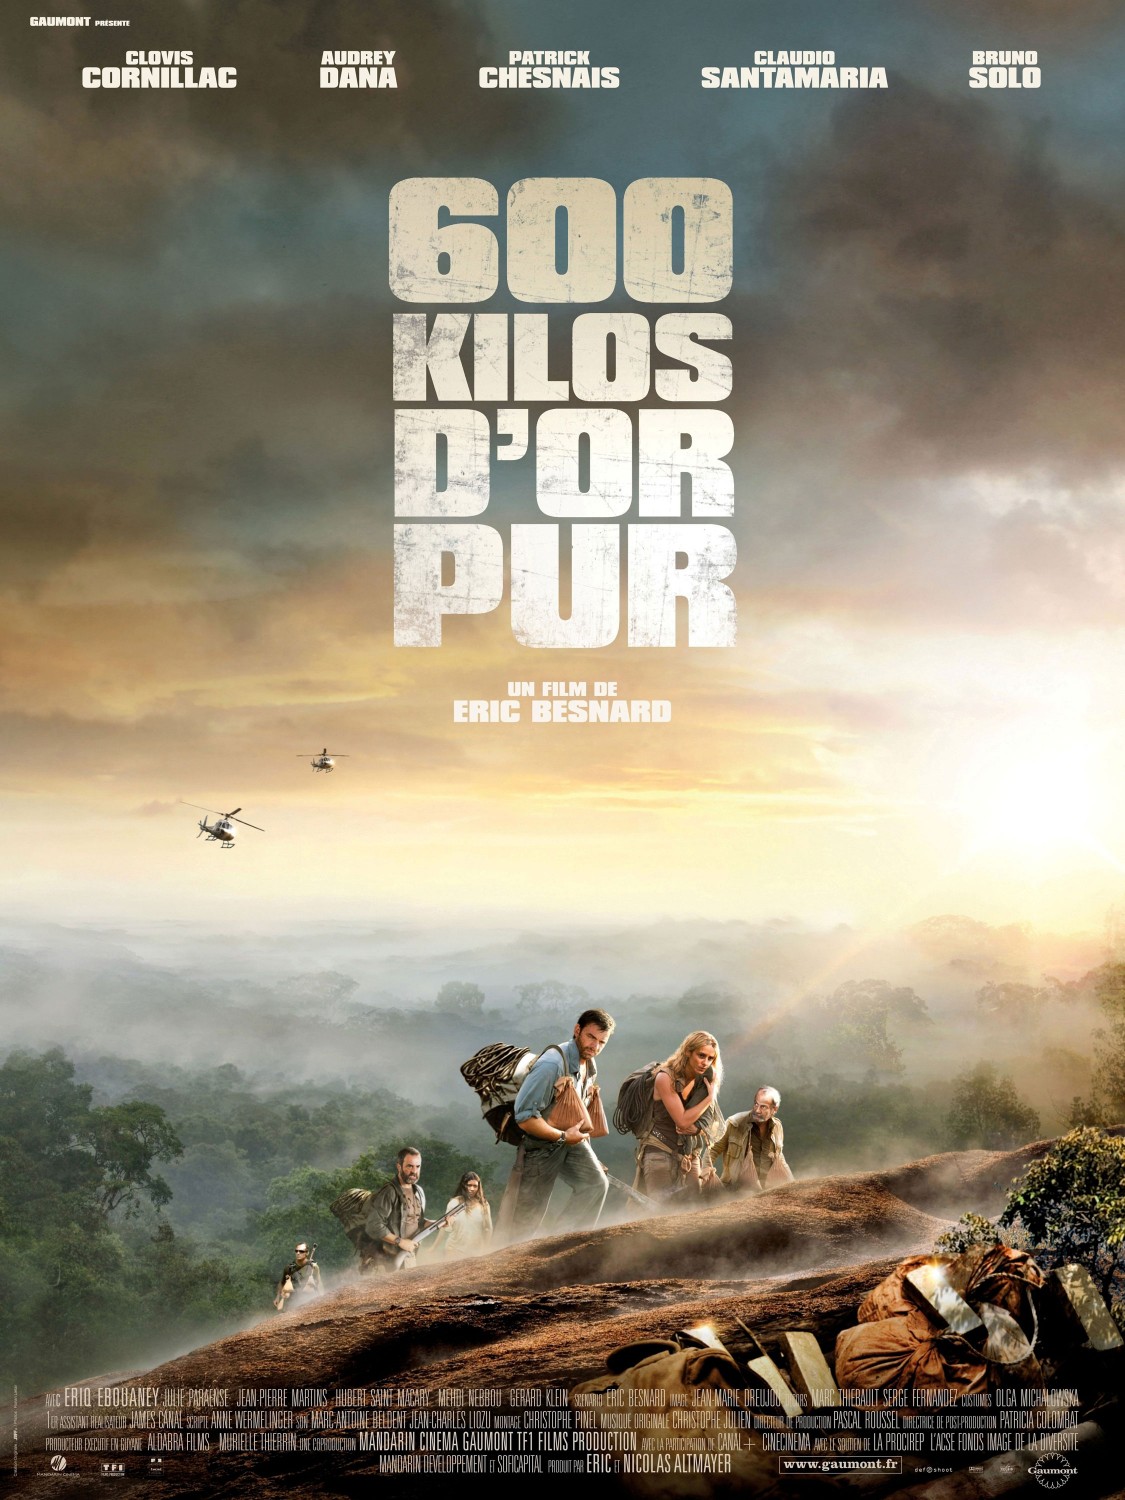 Extra Large Movie Poster Image for 600 kilos d'or pur 